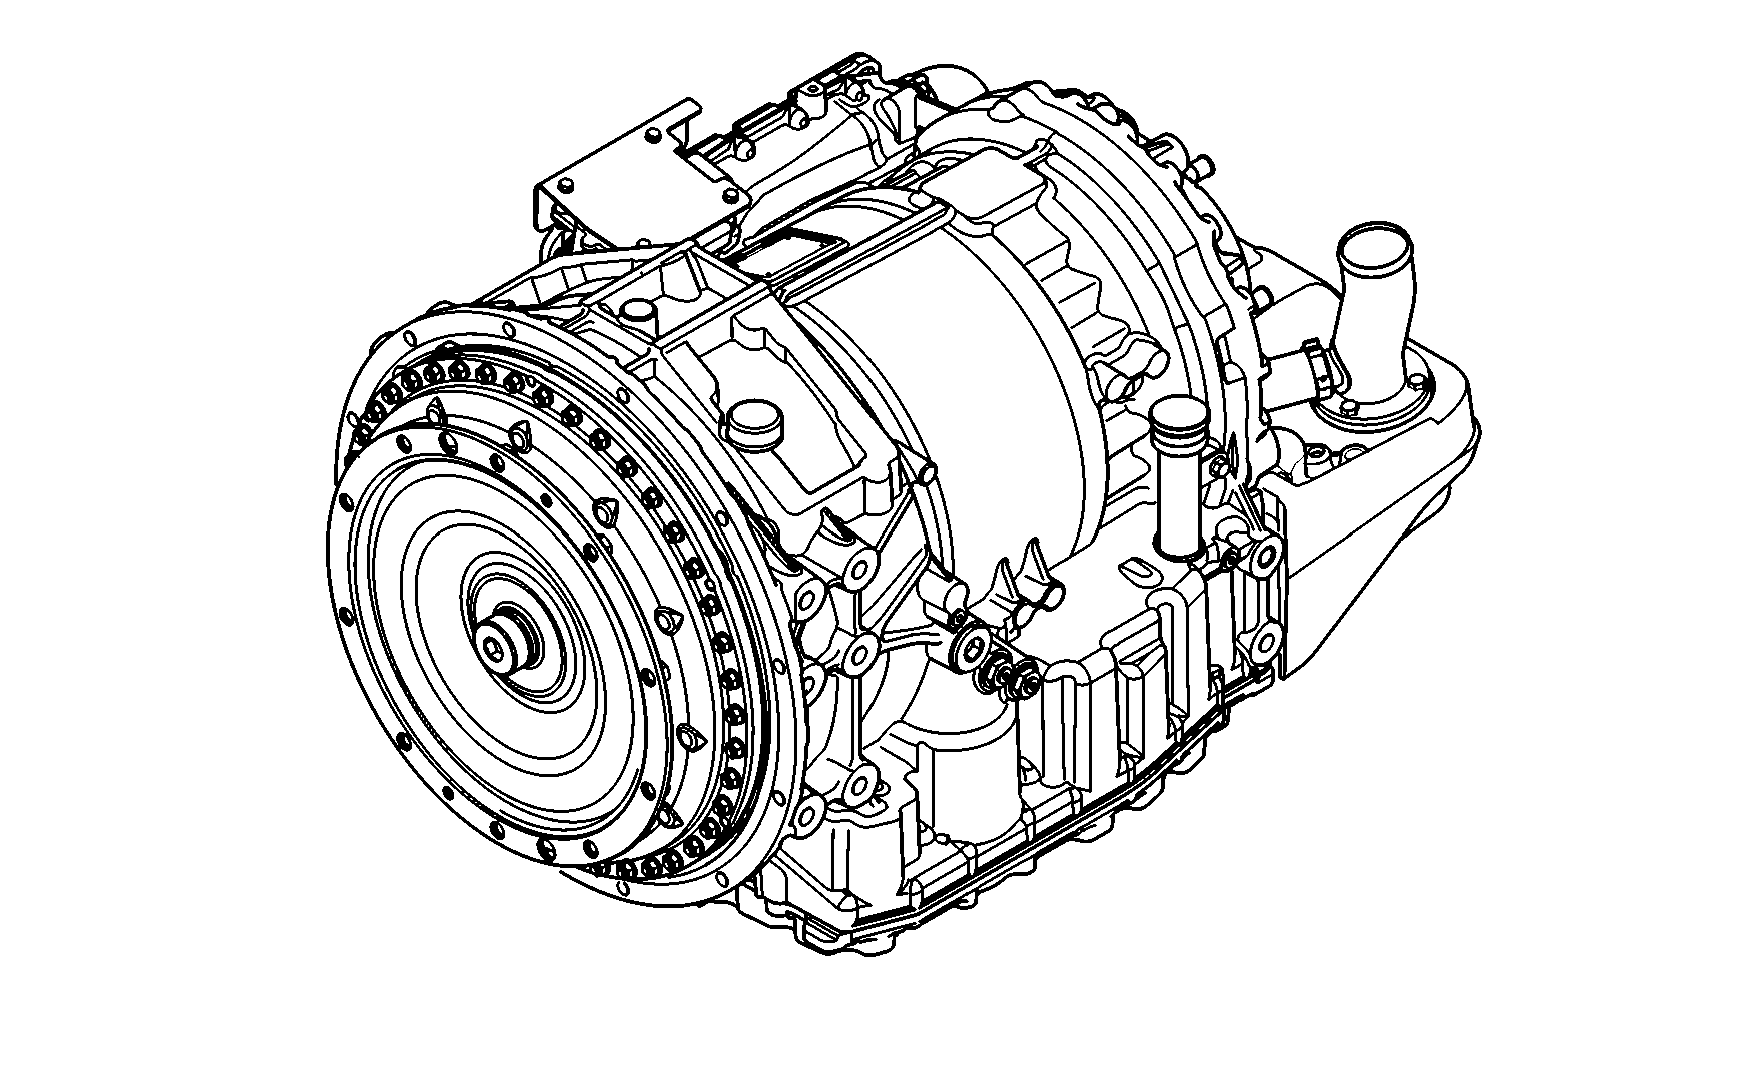 drawing for SCANIA 2260651 - 6 AP 1700 B (figure 1)